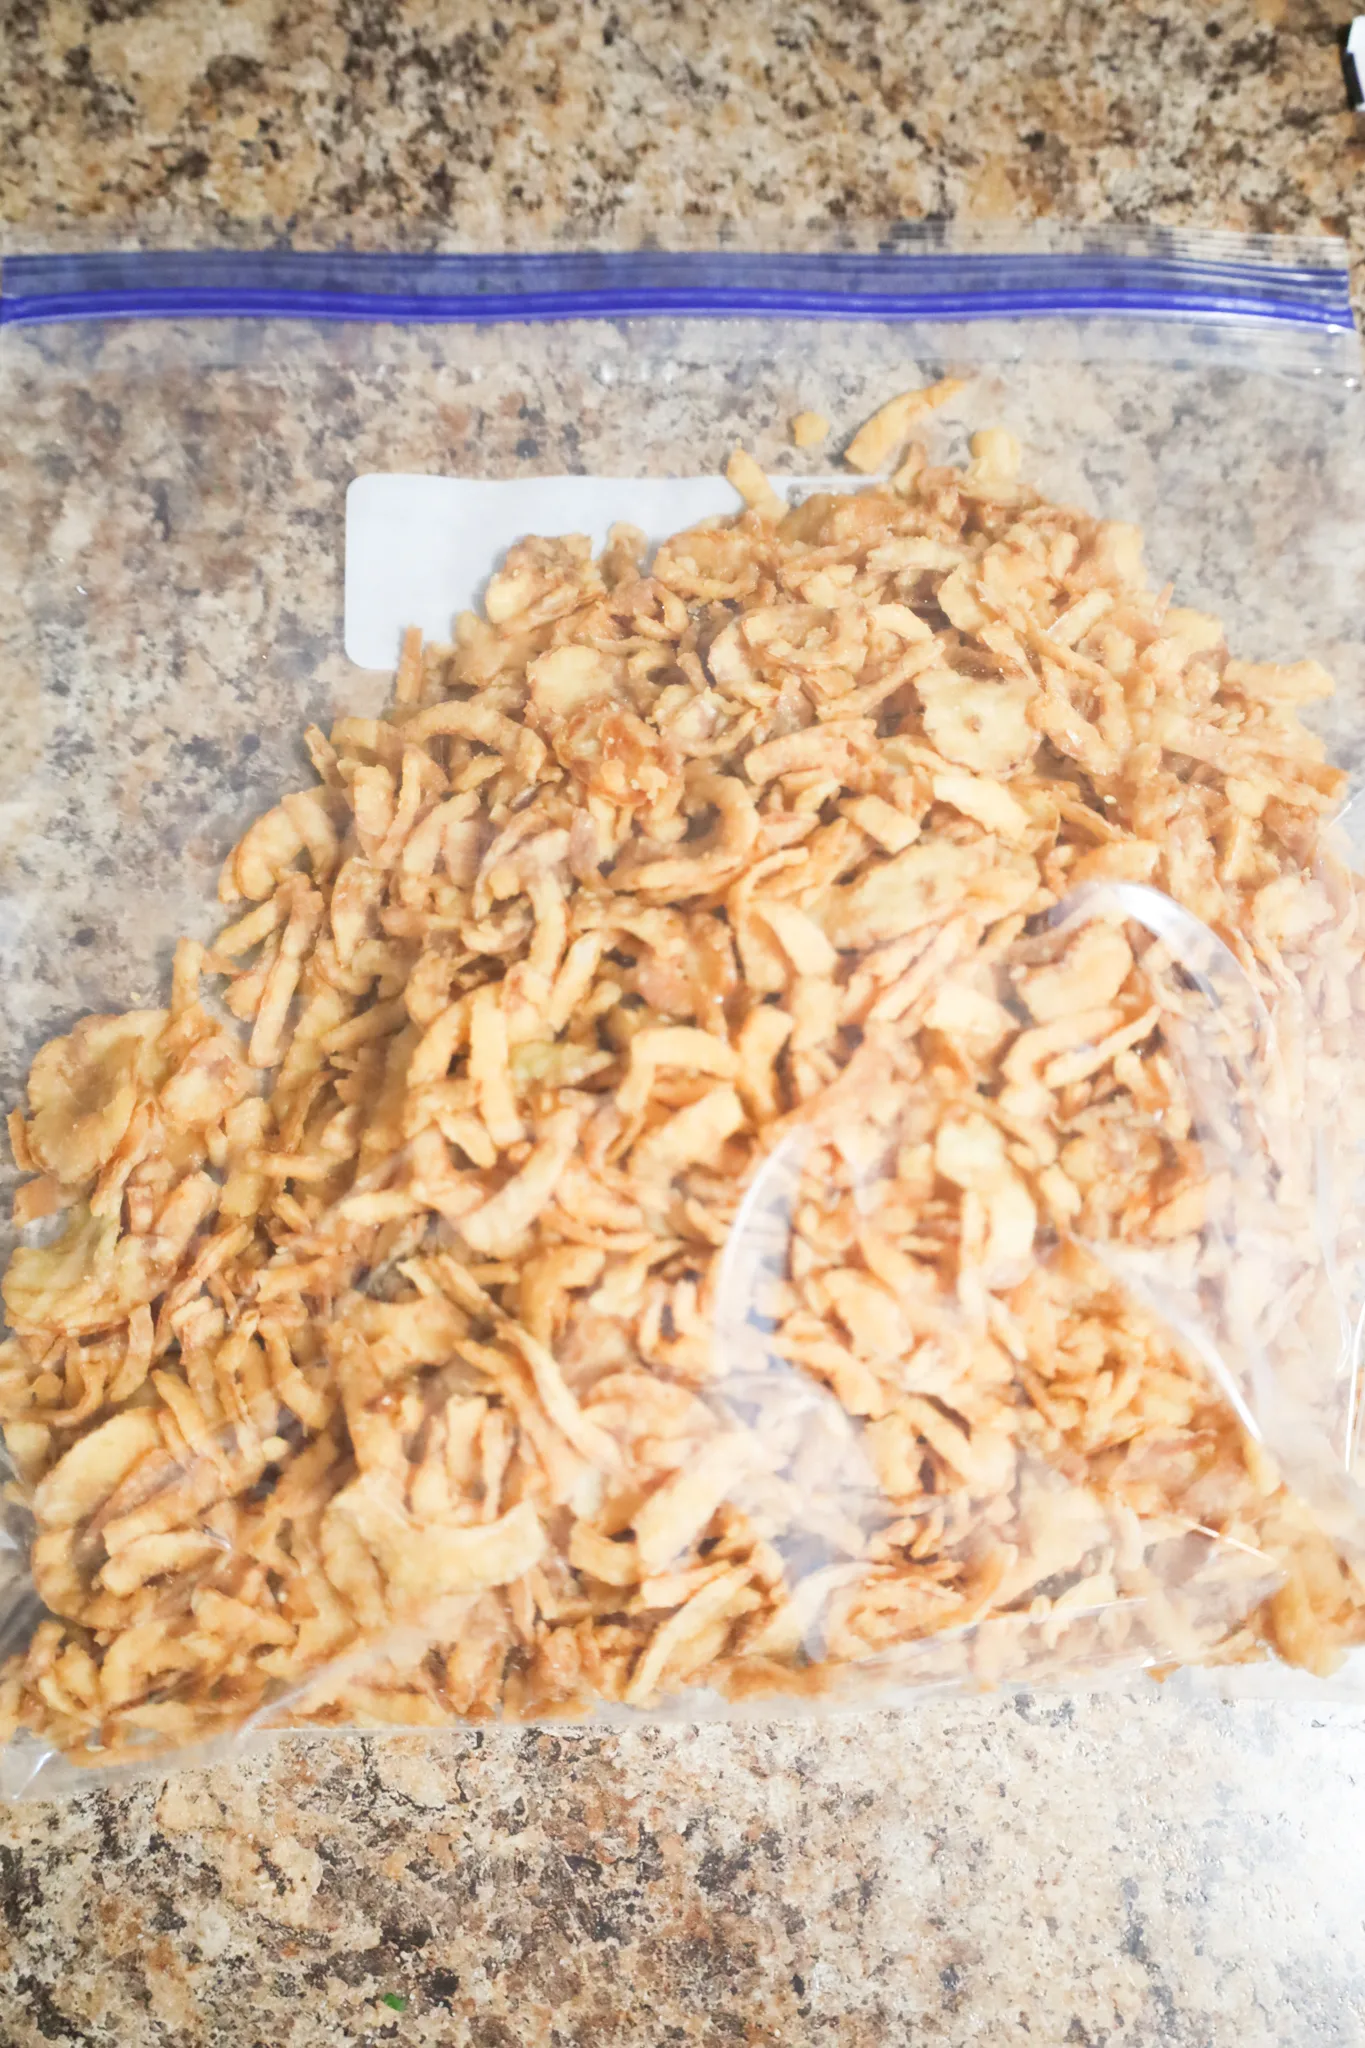 French's fried onions in a large Ziploc bag